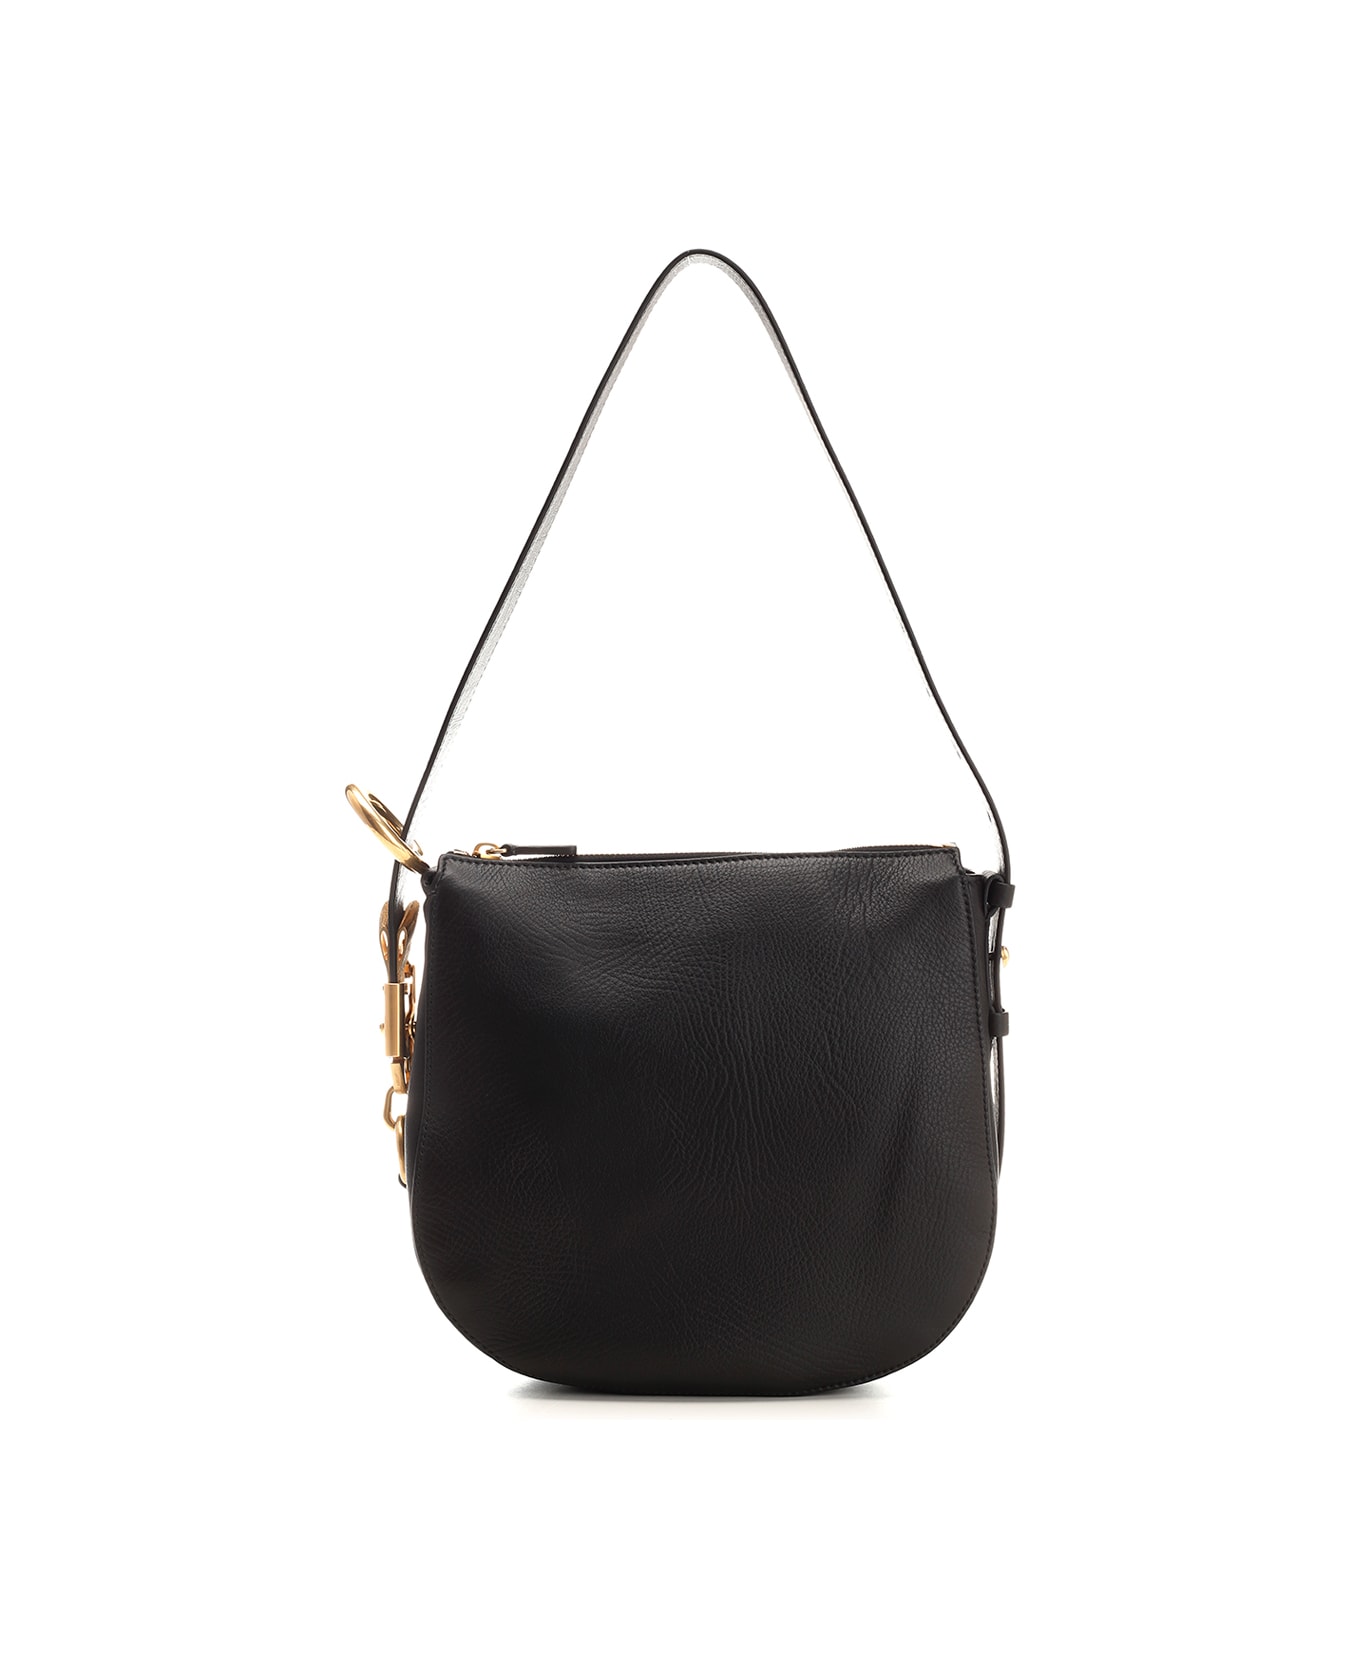 Burberry Small 'knight' Hobo Bag - Black トートバッグ